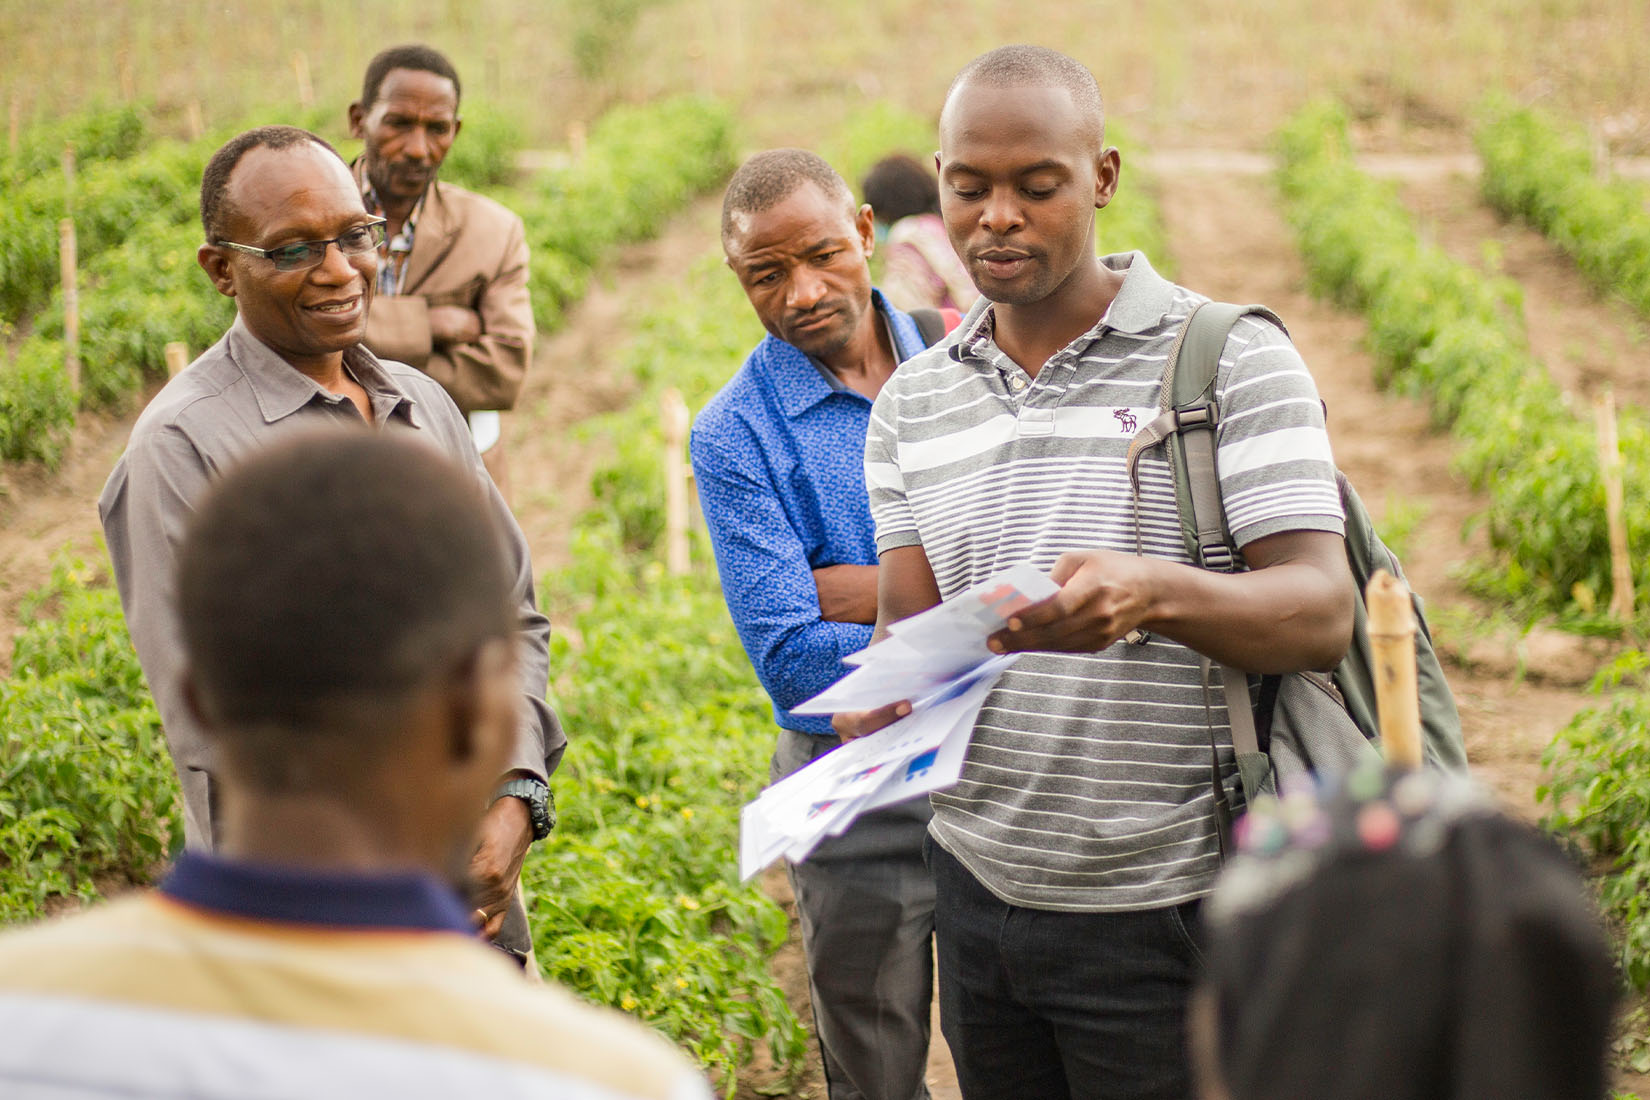 A group of men in a field, with one holding papers, sharing information with the others.